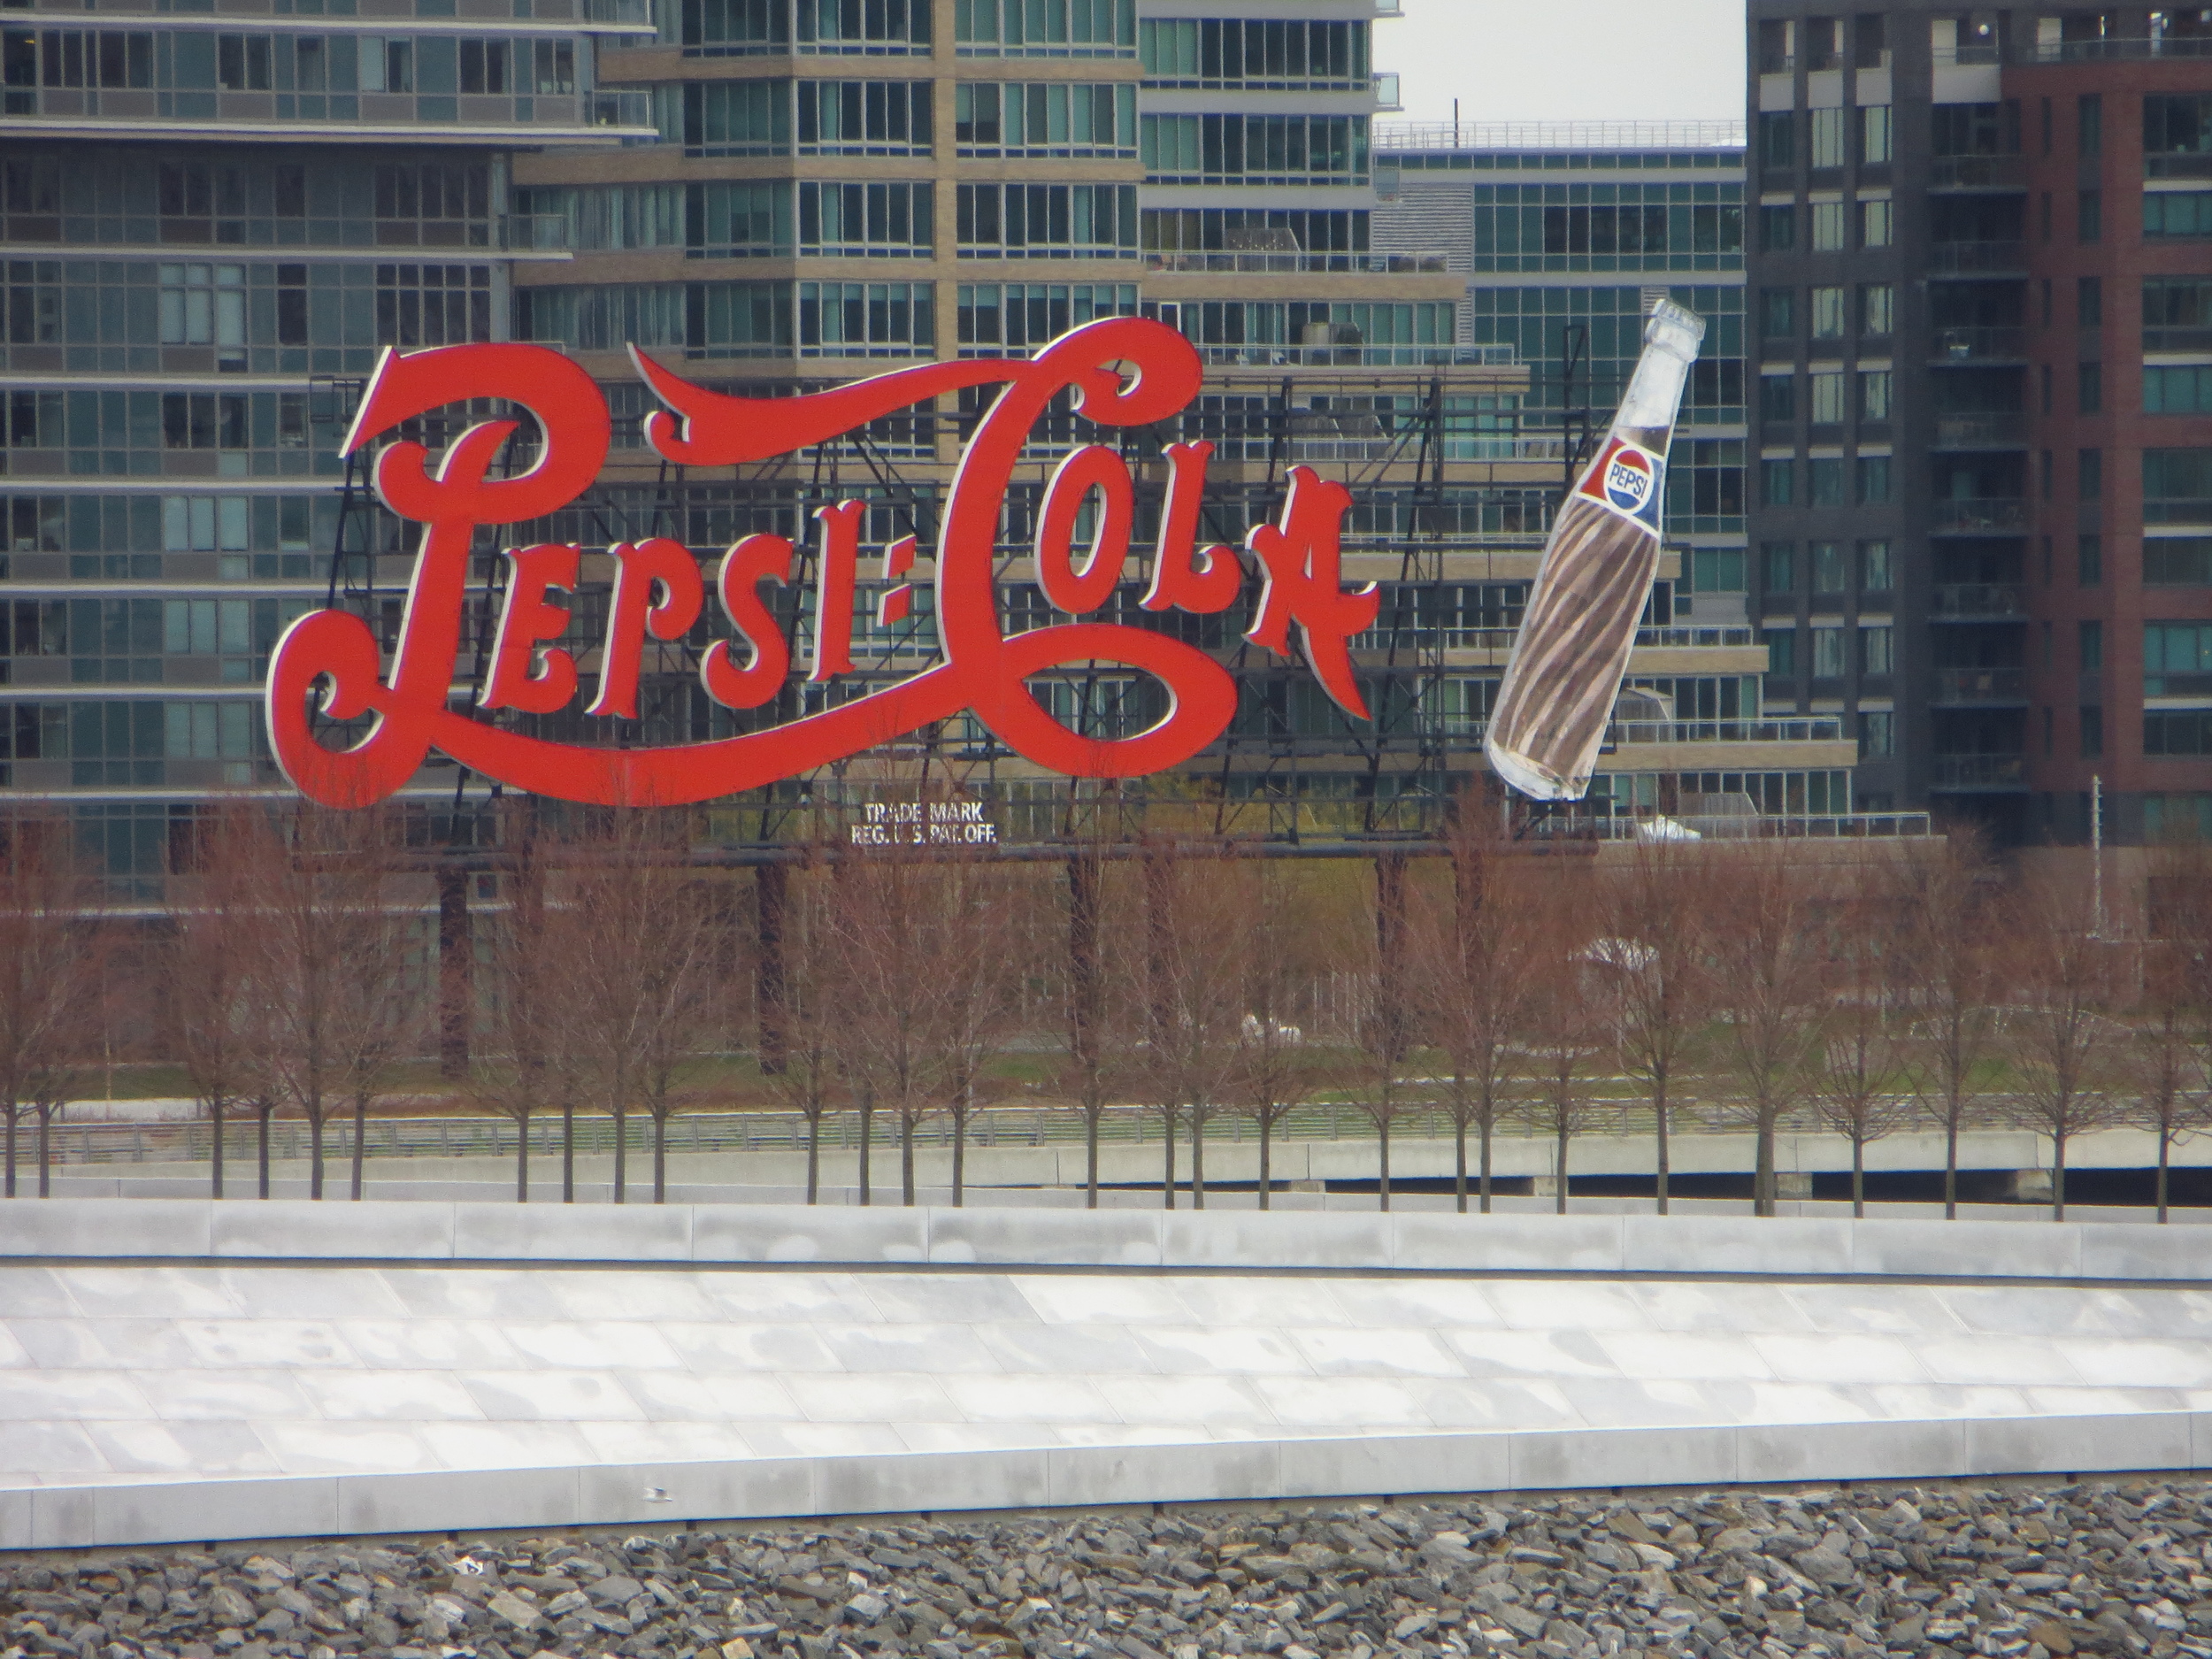 Pepsi sign in Long Island City